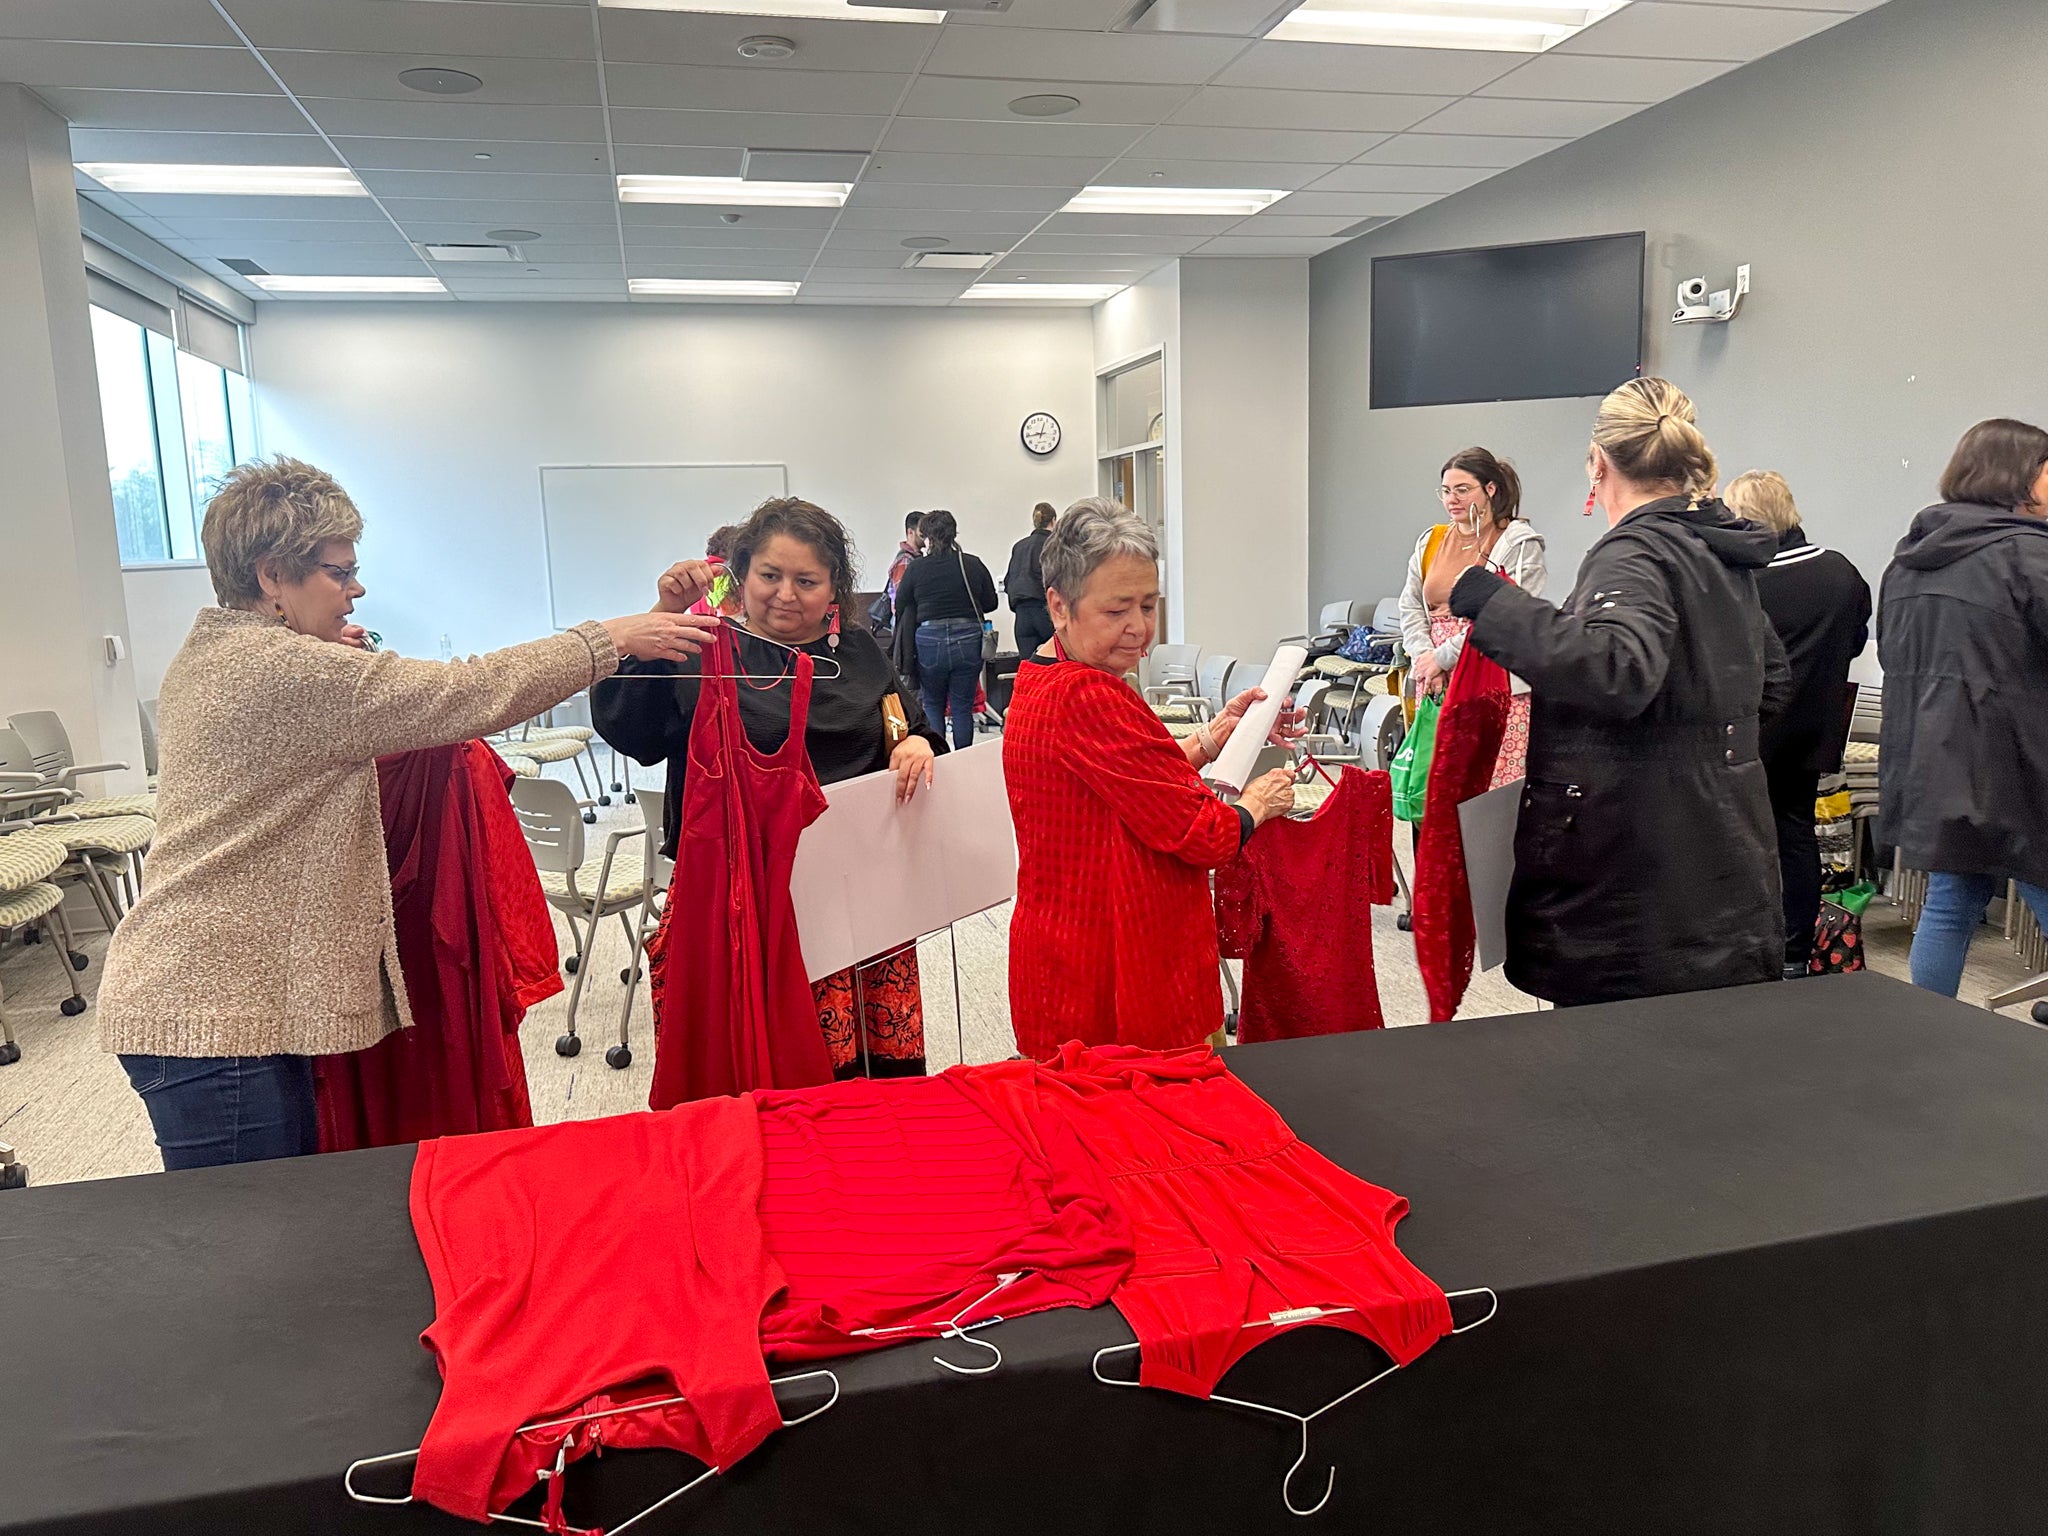 Jean Becker and Robin Jones-Stadelbauer gather red dresses onto a table for the Red Dress Day commemoration ceremony 